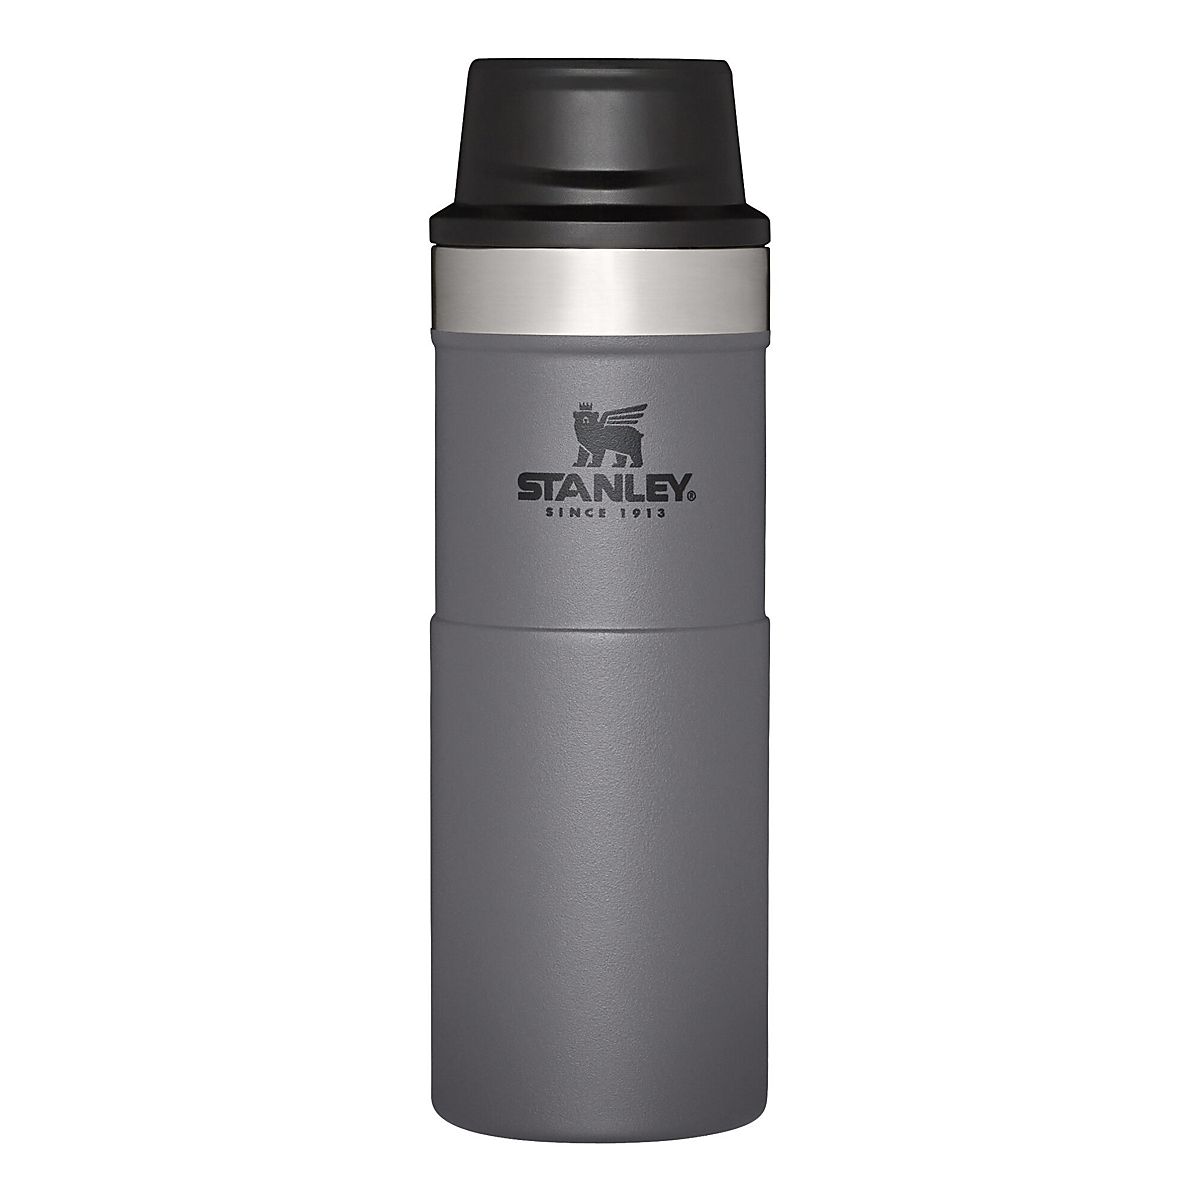 STANLEY Trigger Action Travel Mug 0.35L - Keeps Hot for 5 Hours - BPA-Free  - Thermos Flask for Hot or Cold Drinks - Leakproof Reusable Coffee Cup -  Dishwasher Safe - Matte Black: Home & Kitchen 